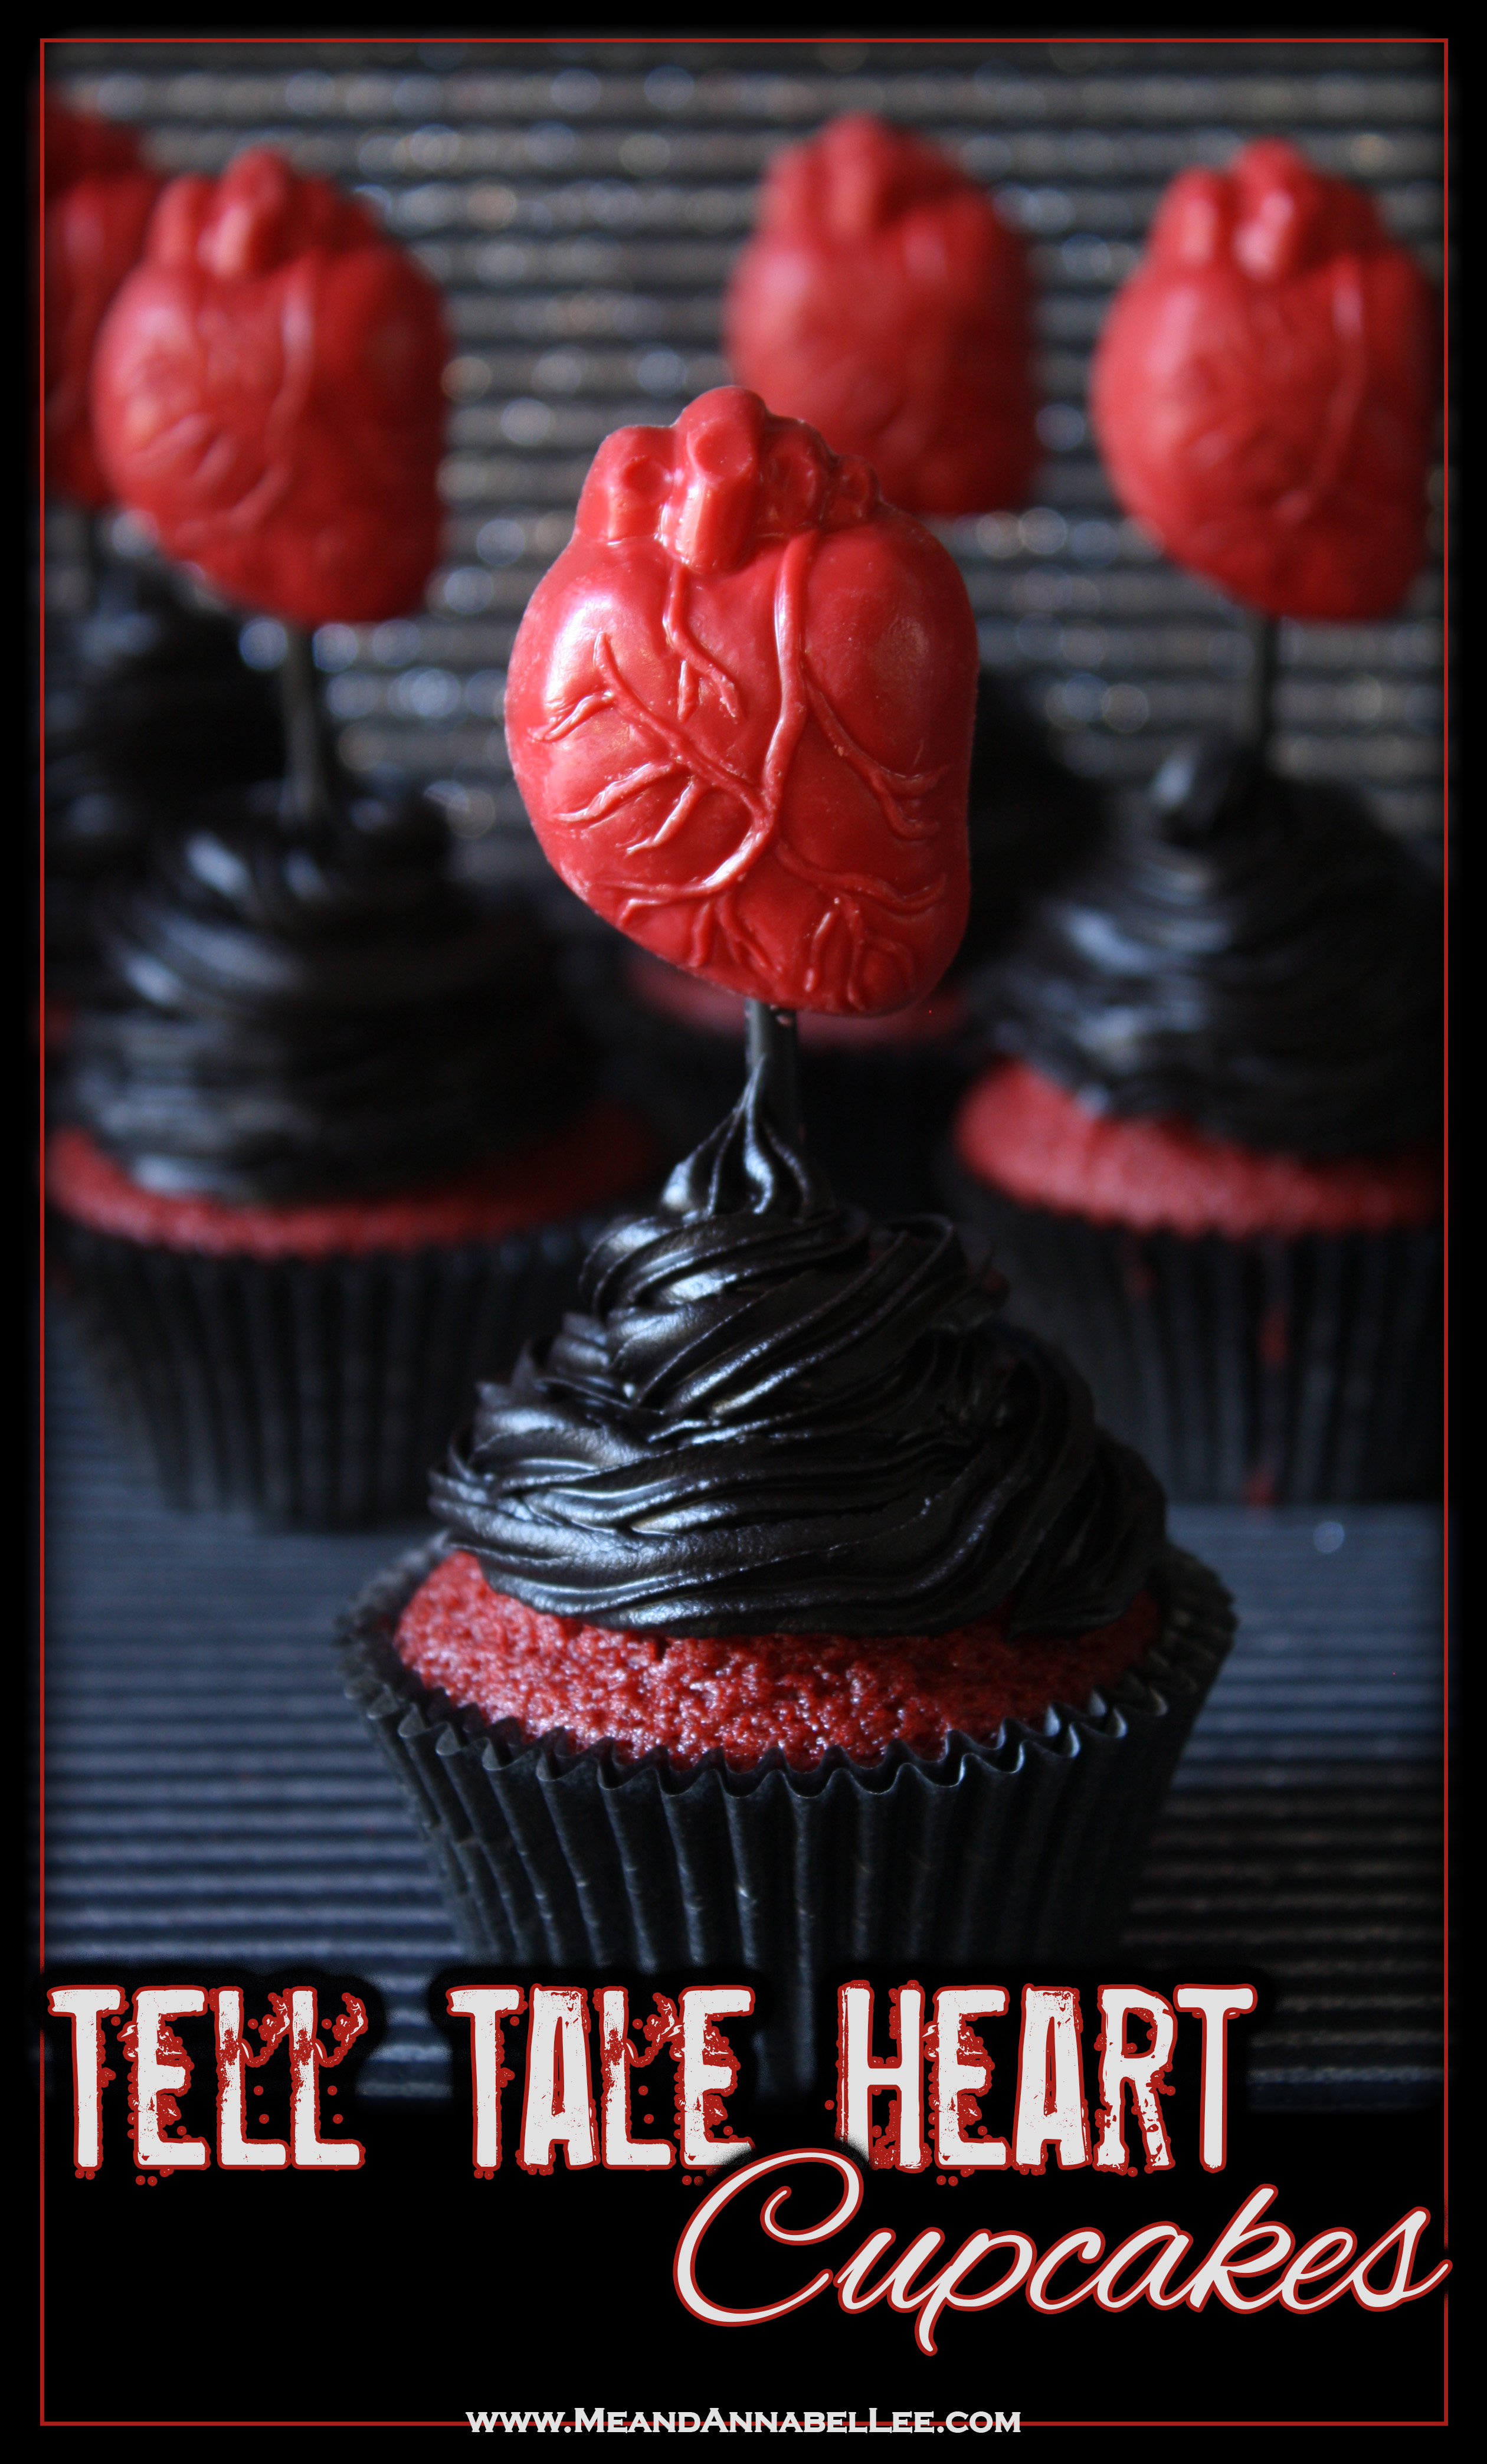 Tell Tale Heart Gothic Valentine Cupcakes | Anatomical Human Heart | Red Velvet Cake and Black Fudge Frosting | Halloween Treats | Edgar Allan Poe Party | www.MeandAnnabelLee.com